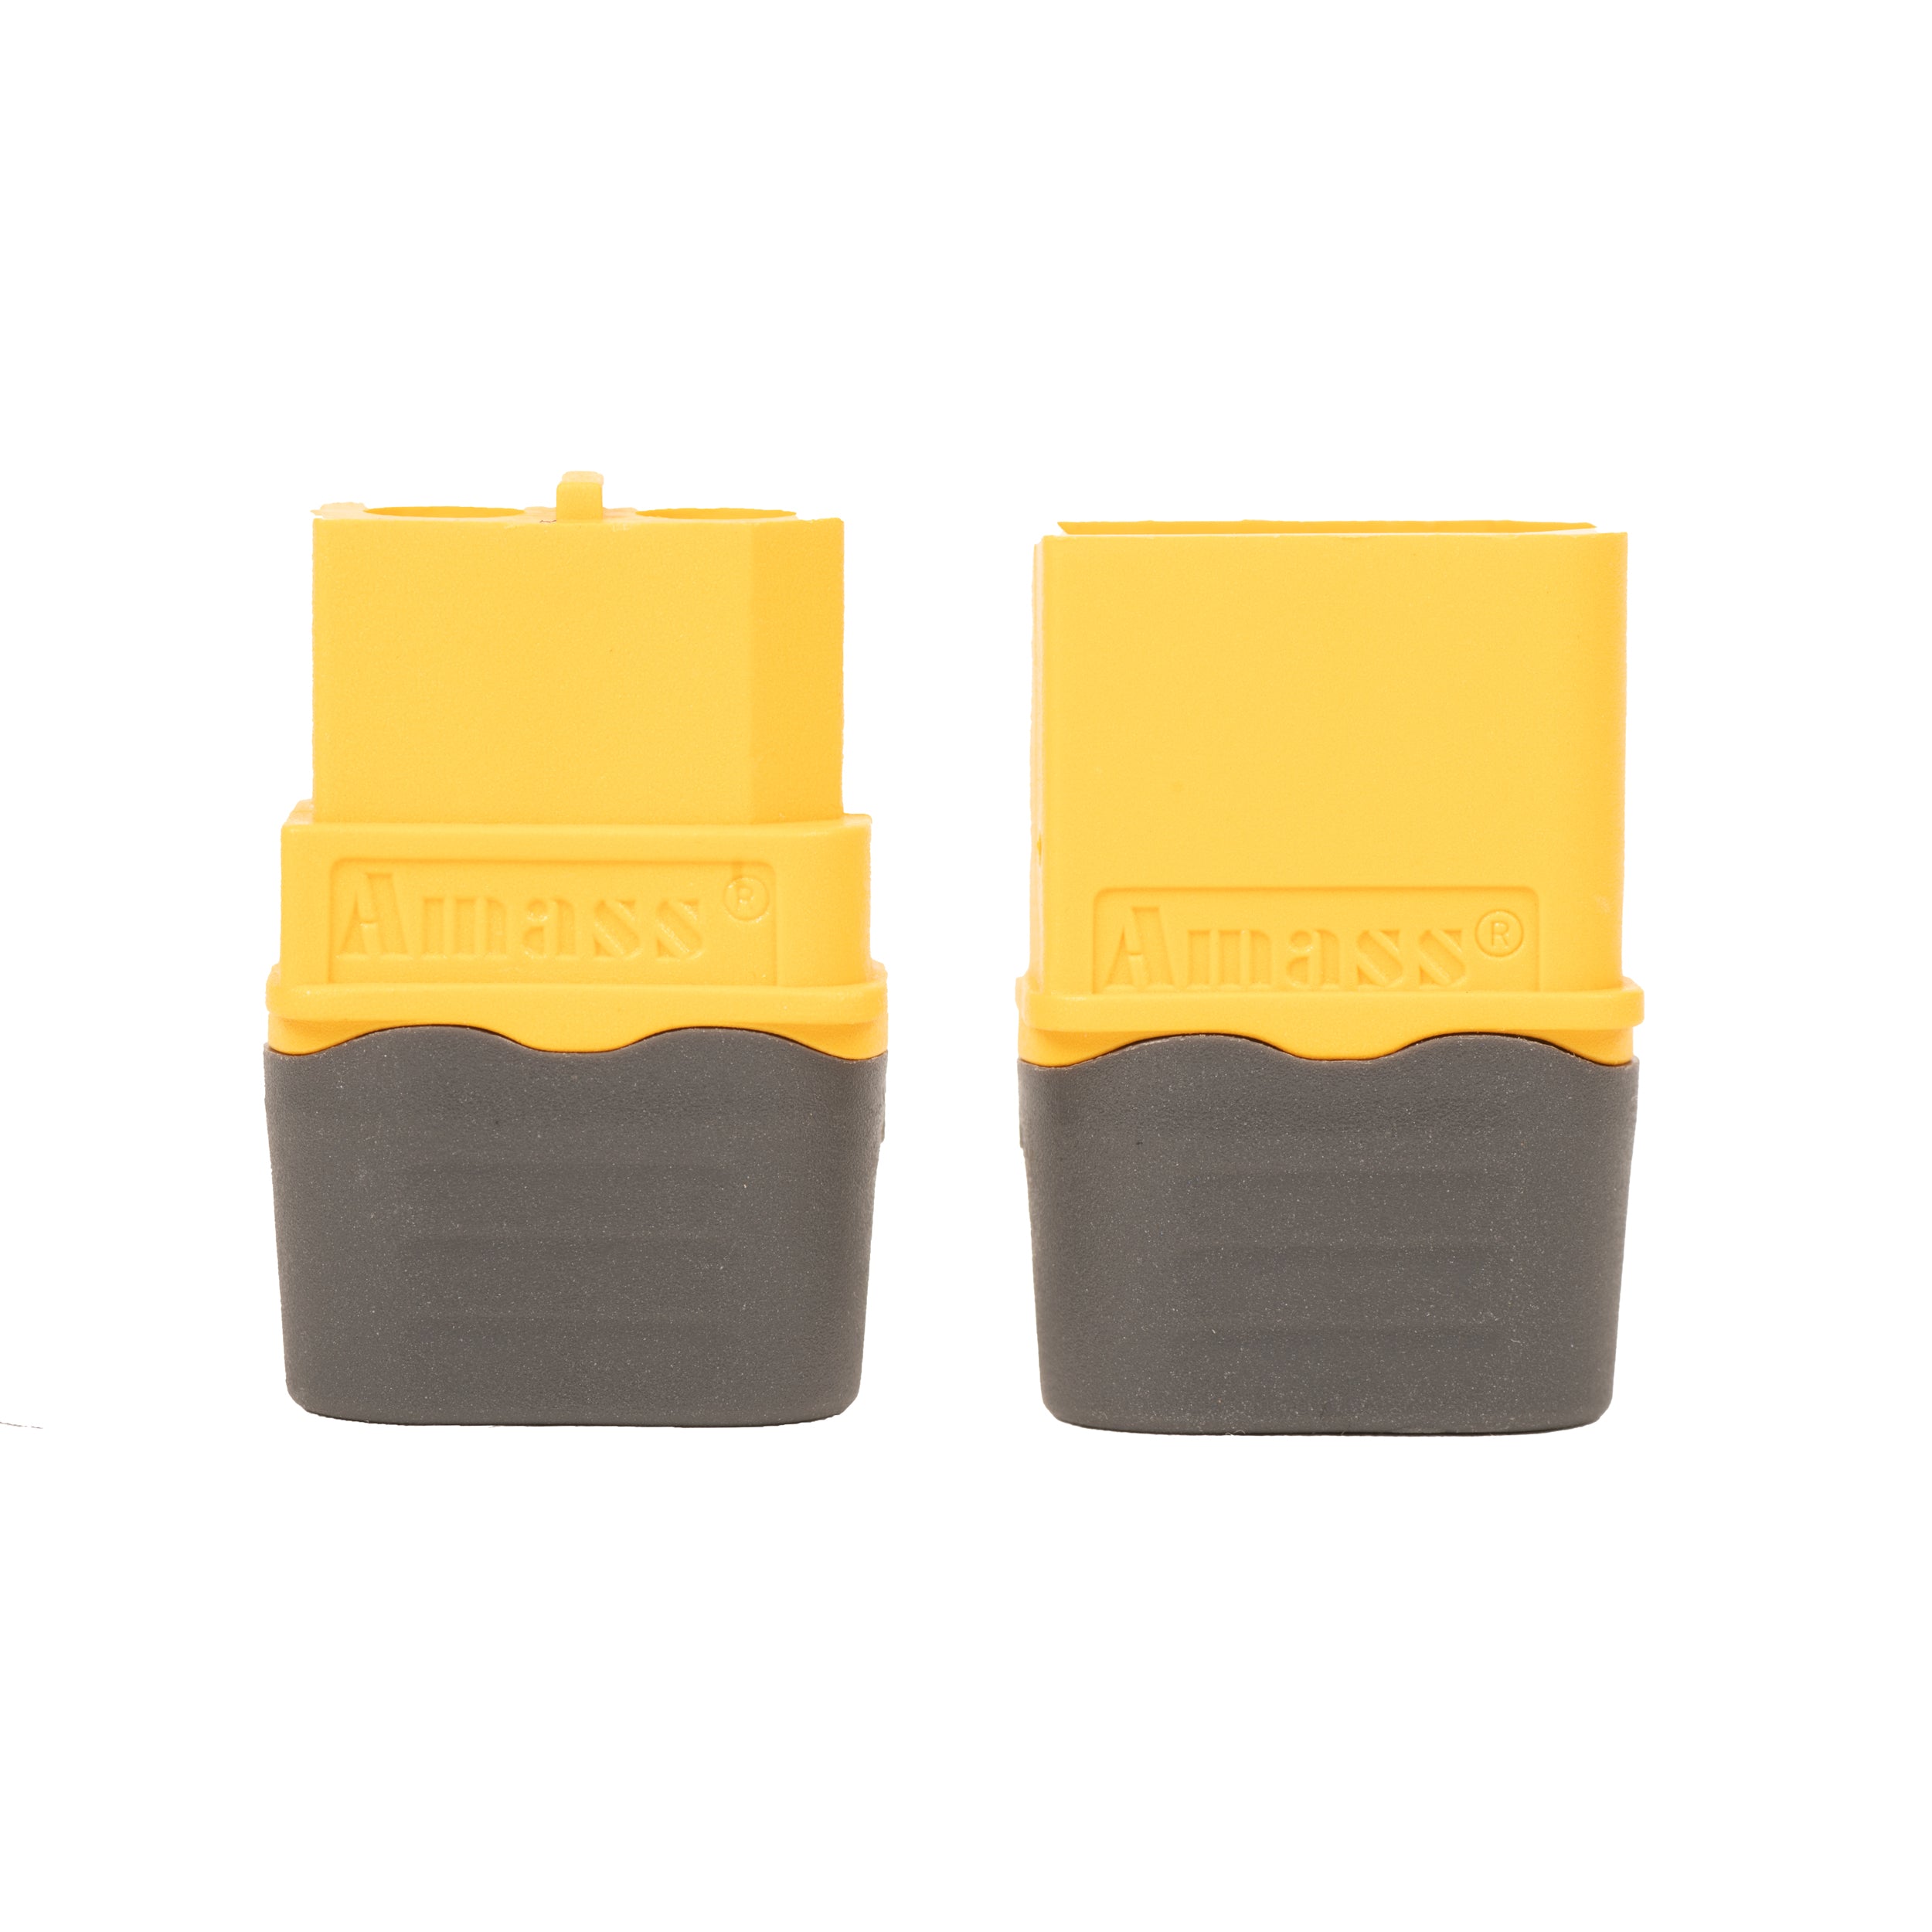 RBS PRO G2 Replacement Electrical Connectors for Foot Pedal